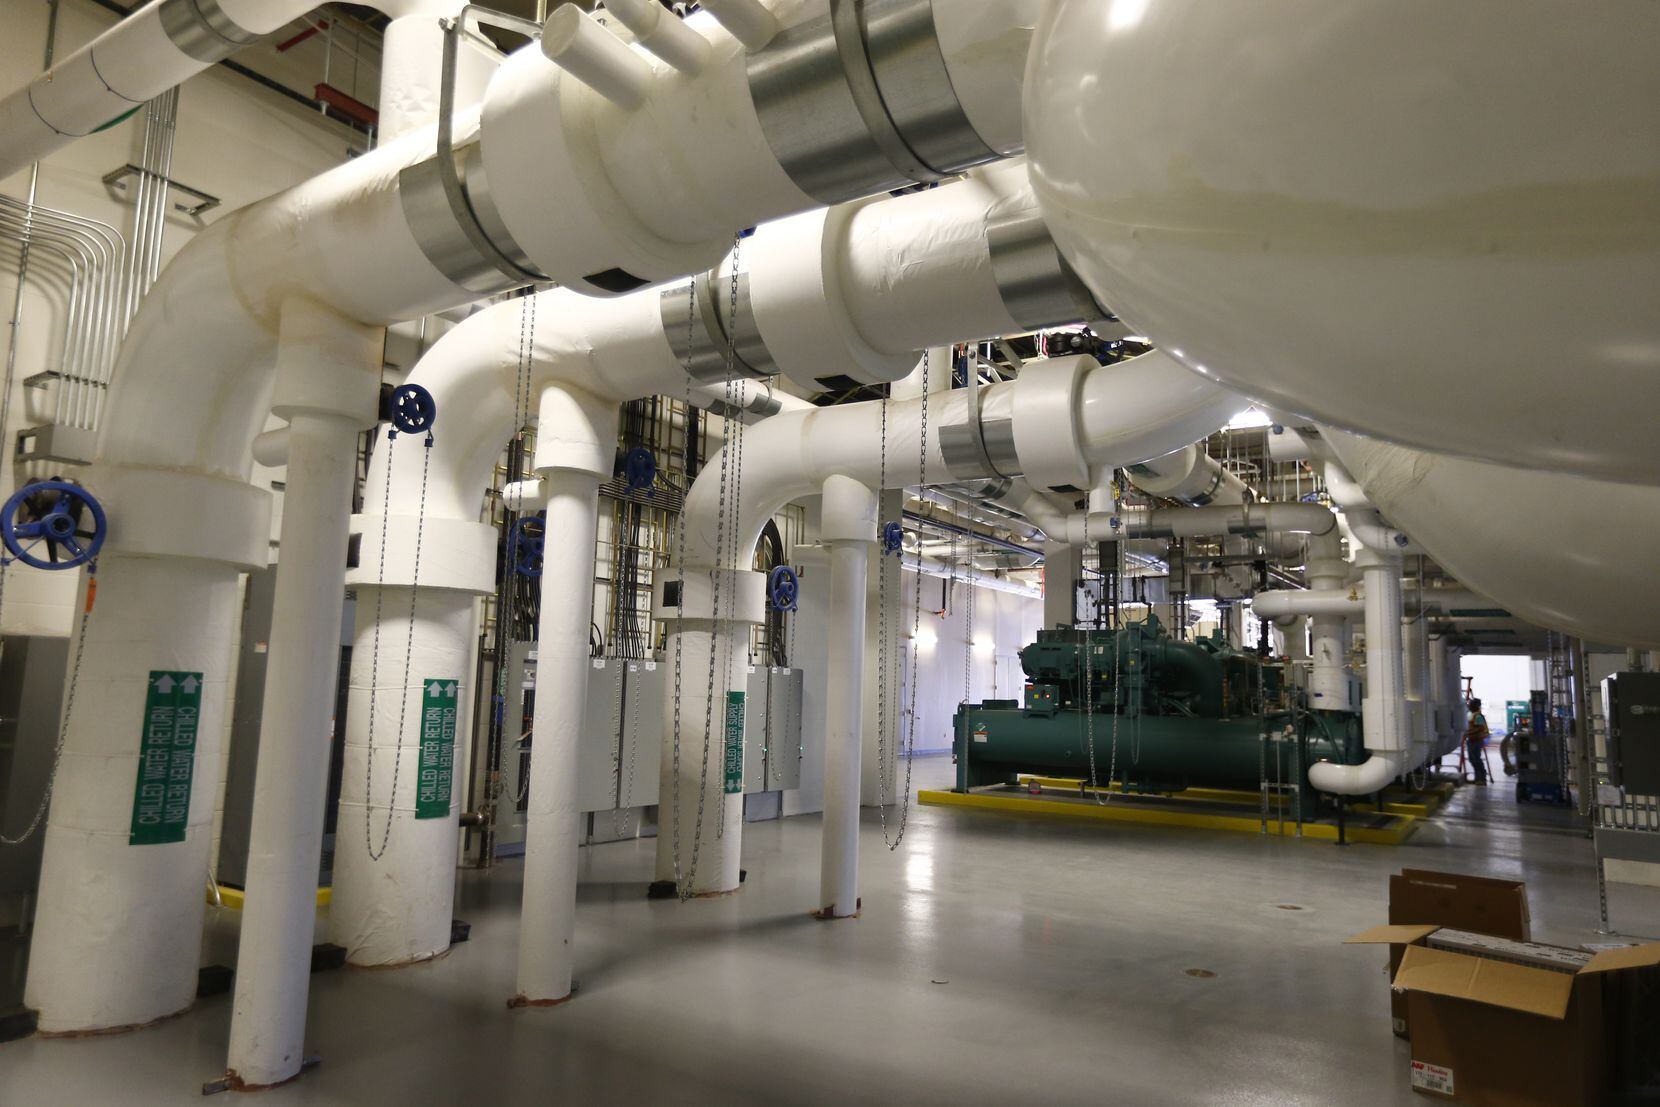 The mechanical plant at the QTS Irving data center includes big chillers to cool off the...